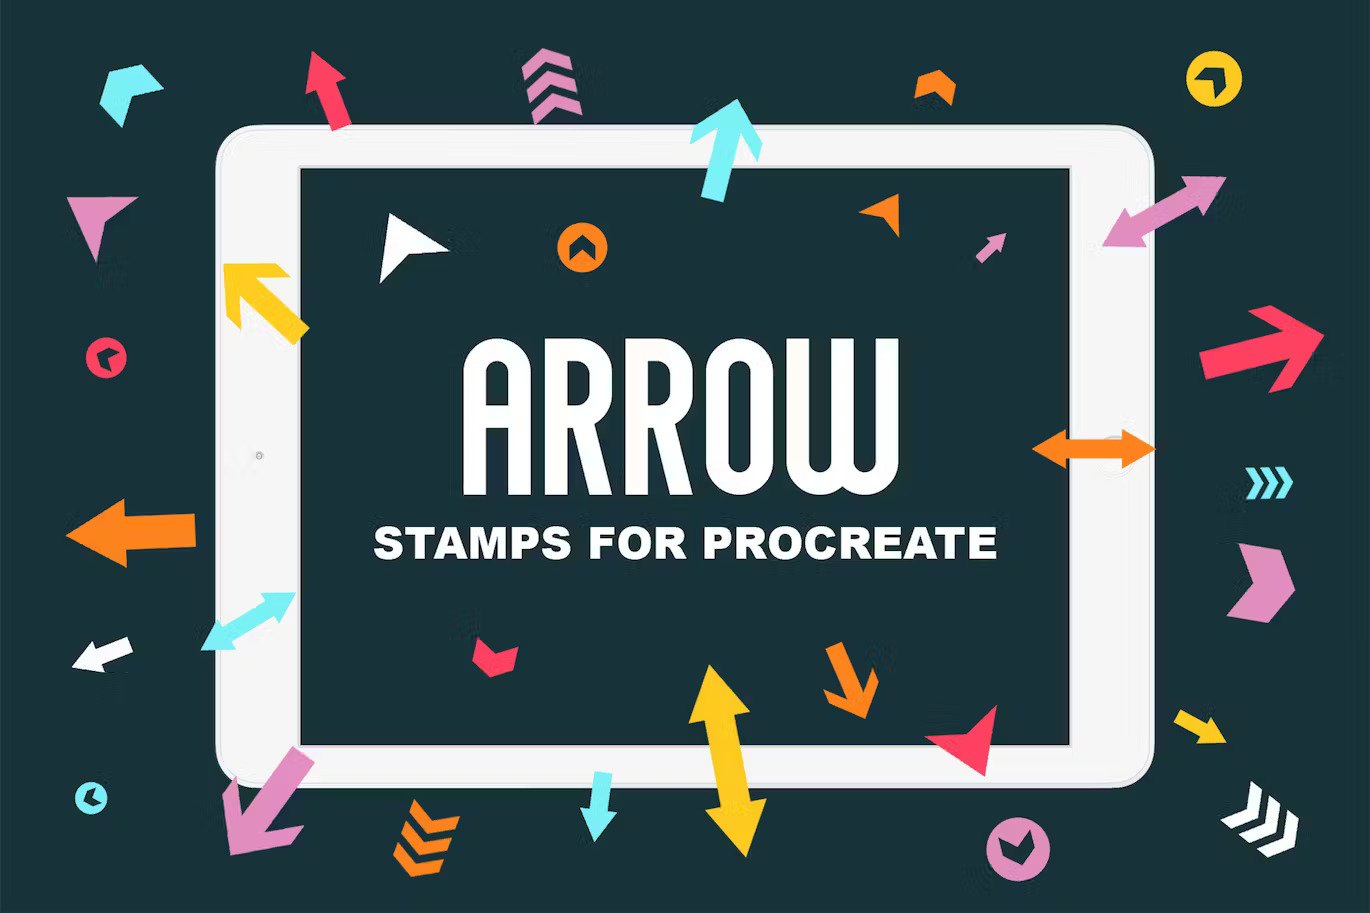 Arrow stamp brushes for procreate